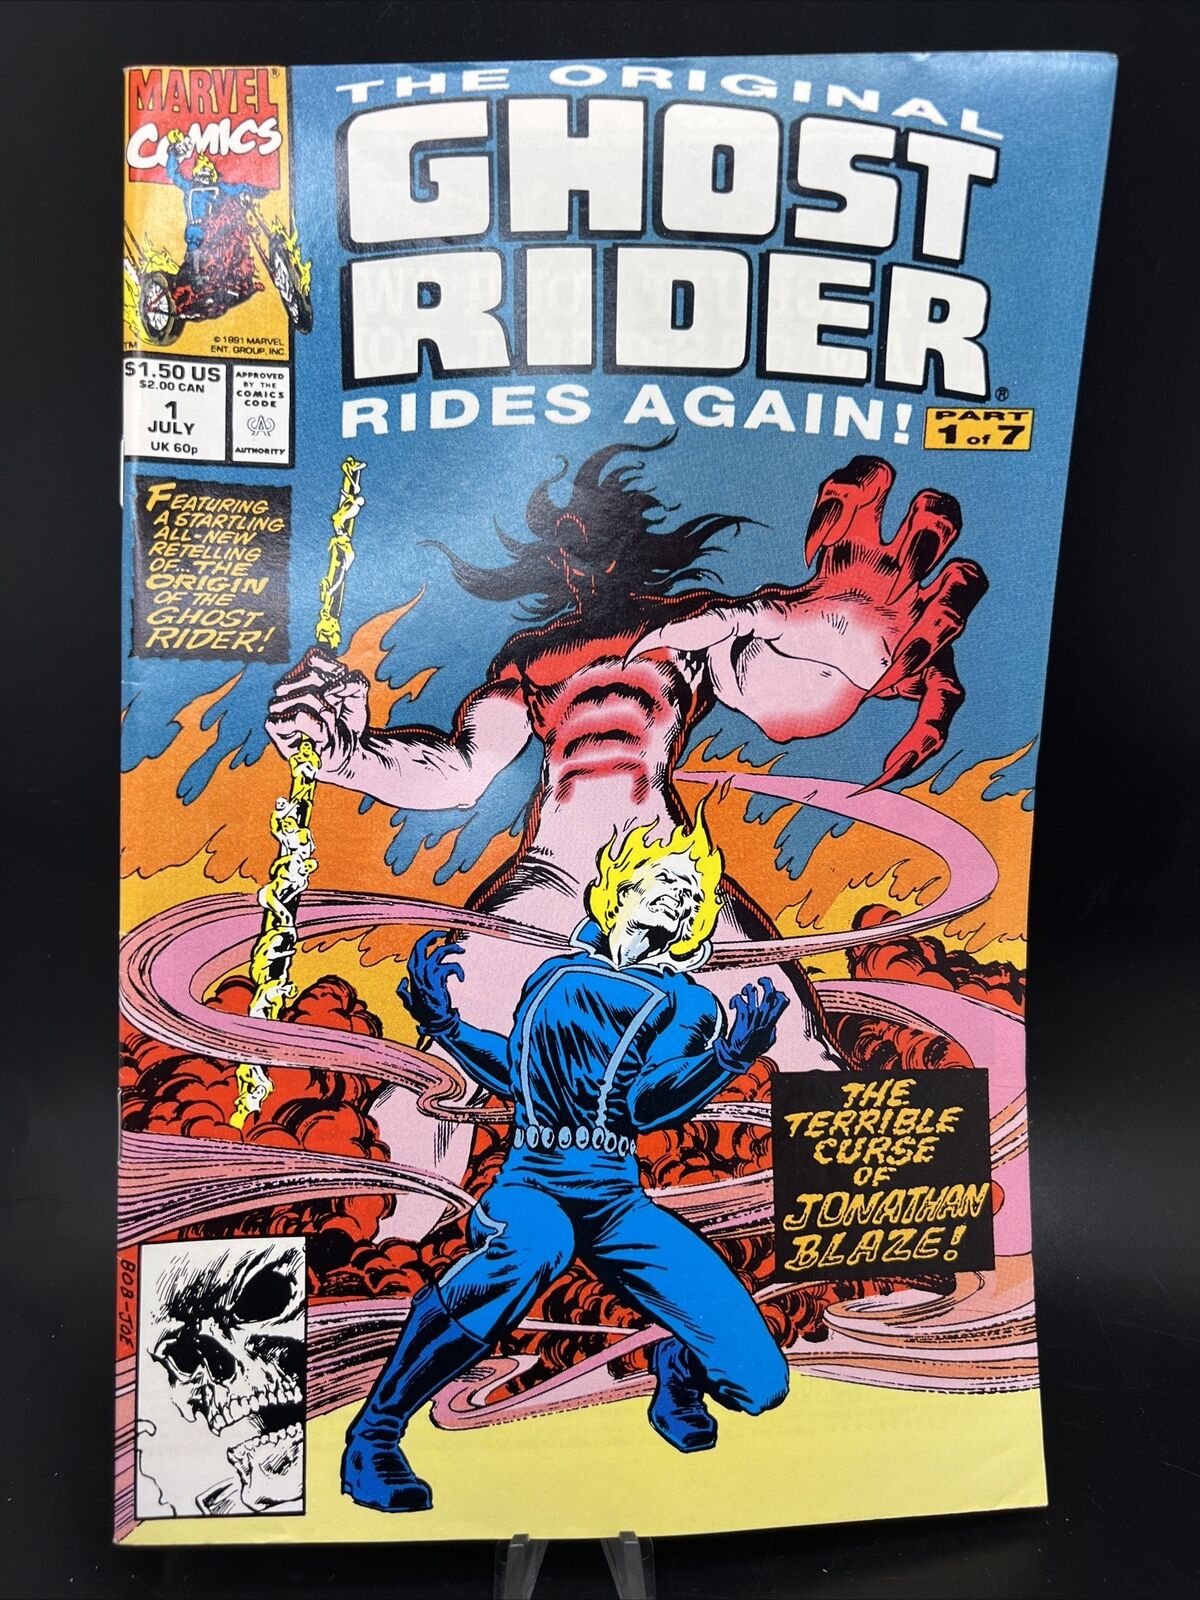 The Original Ghost Rider Rides Again #1 of 7 Marvel Comic Book 1991 July 1